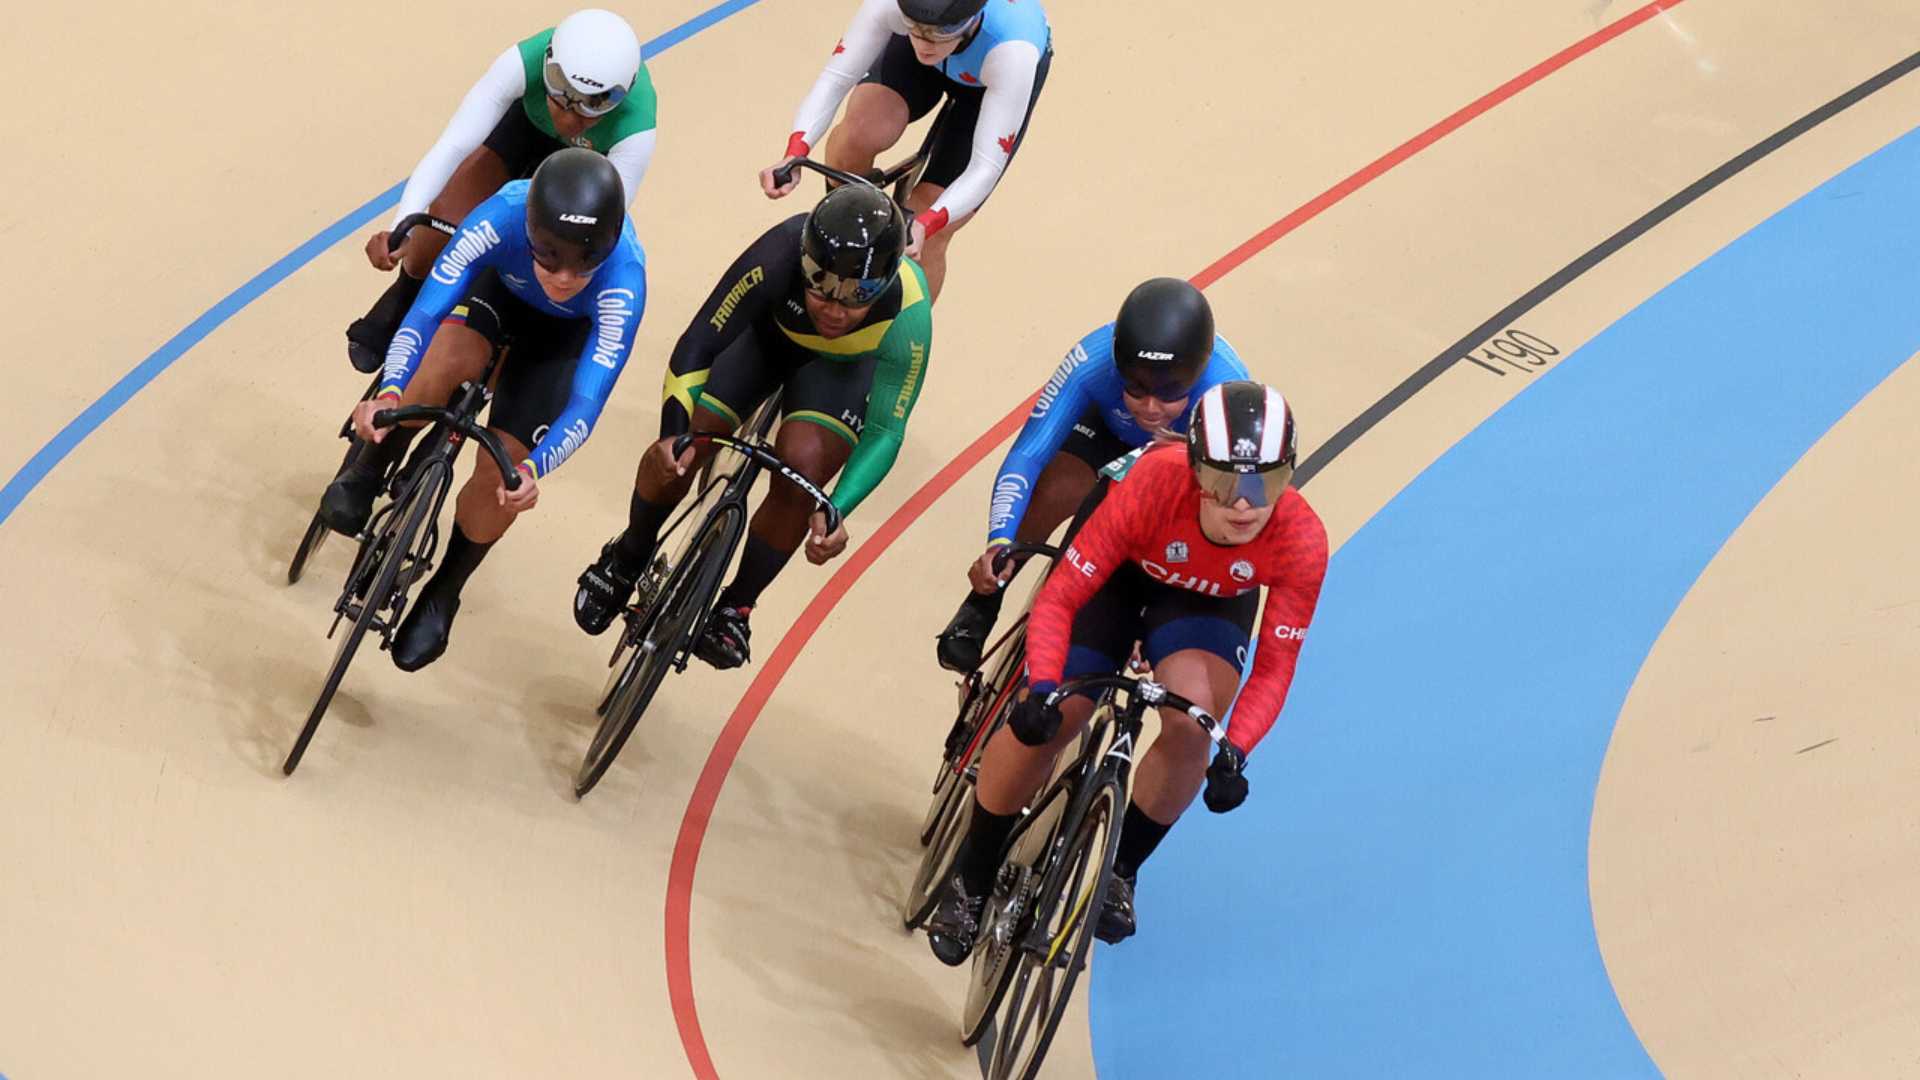 The track cycling held its qualifying rounds